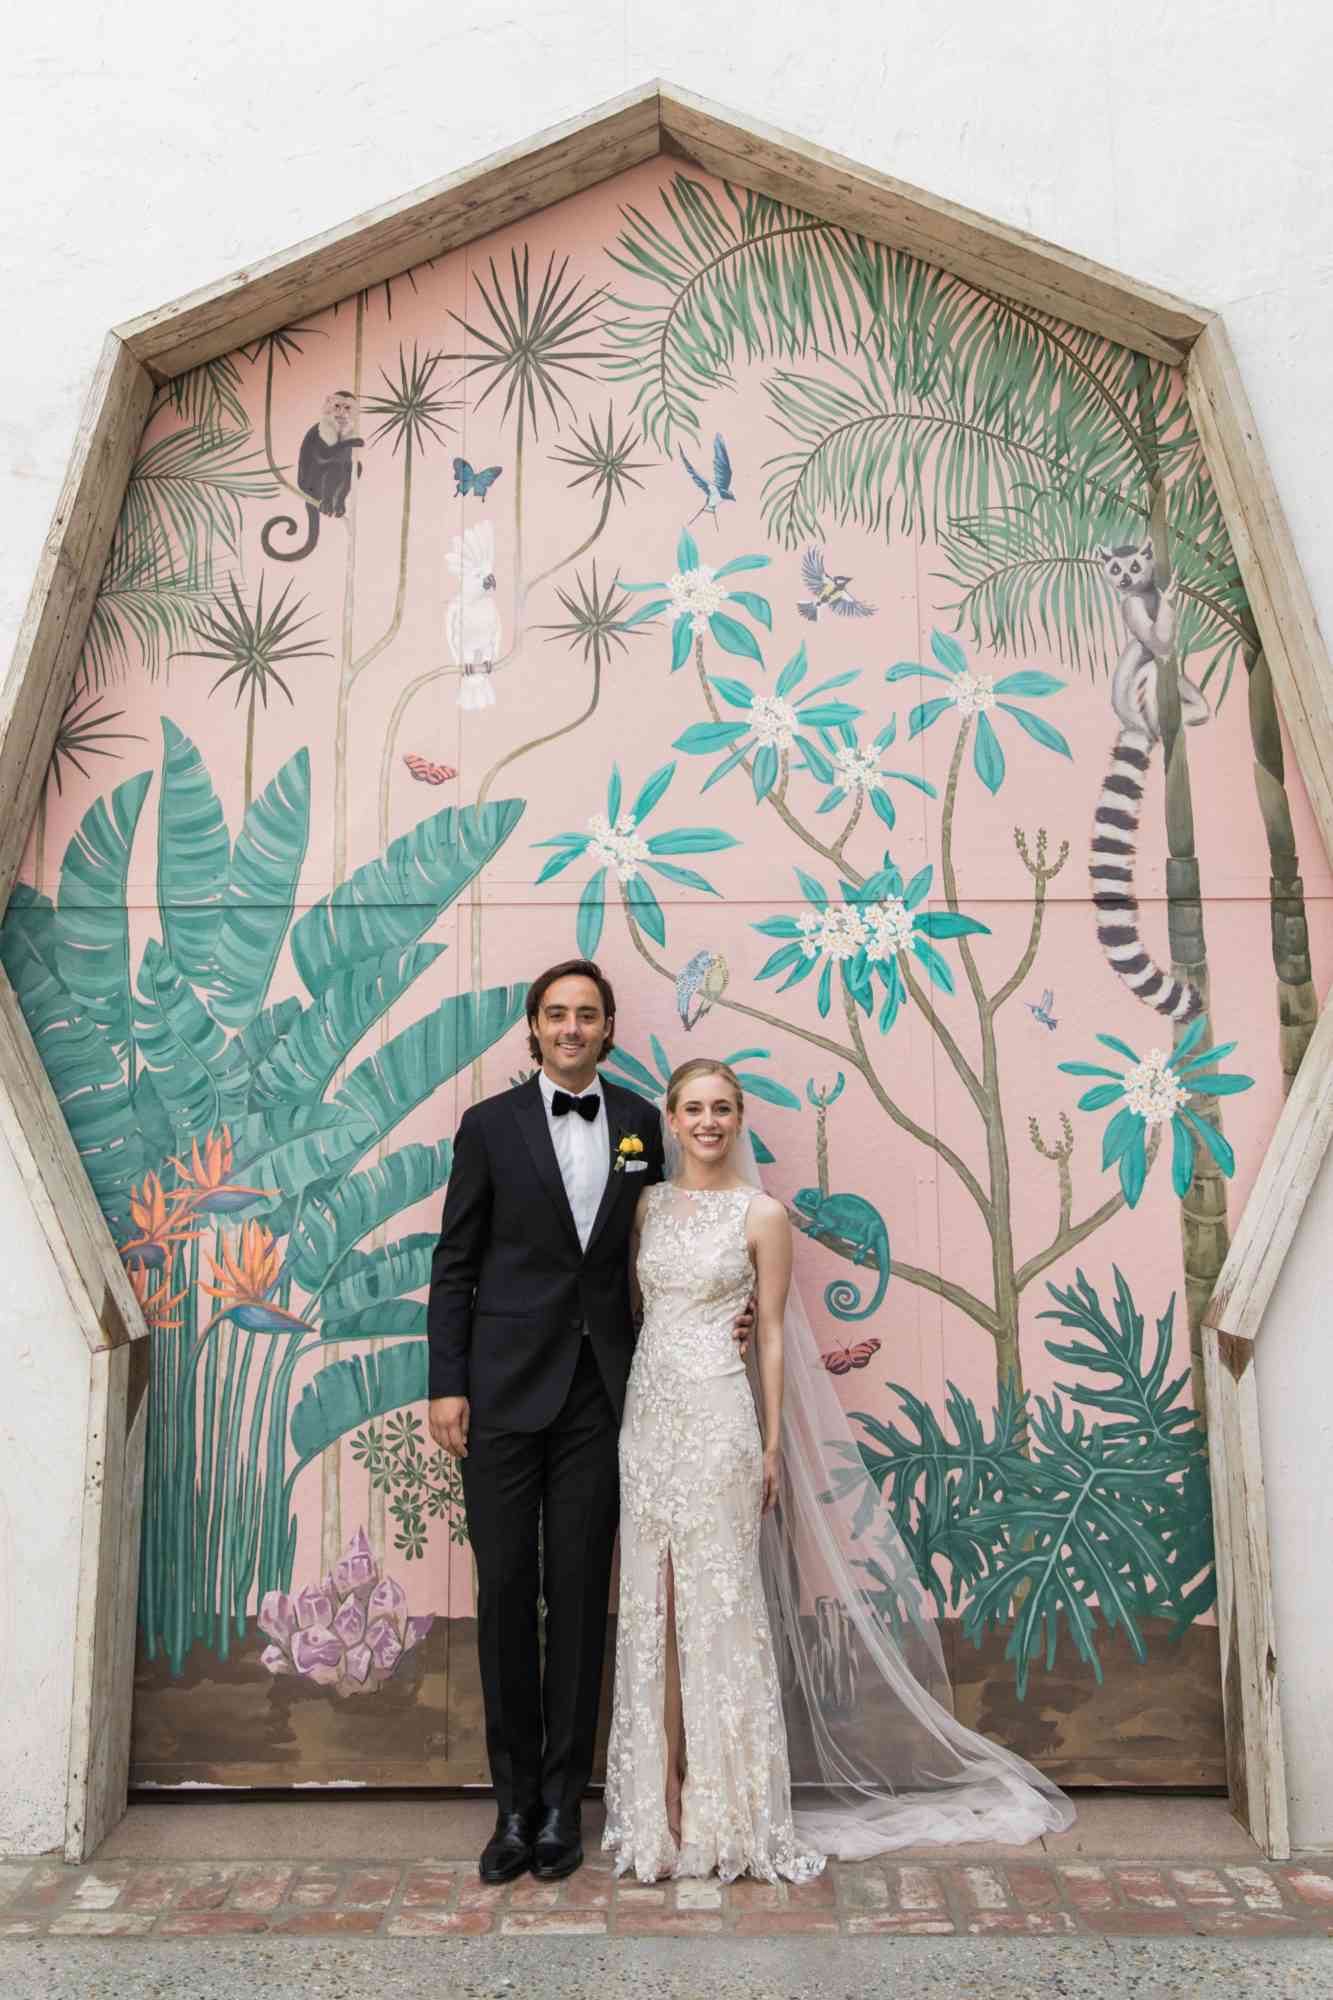 bride and groom pose in wedding attire in front of painted wall